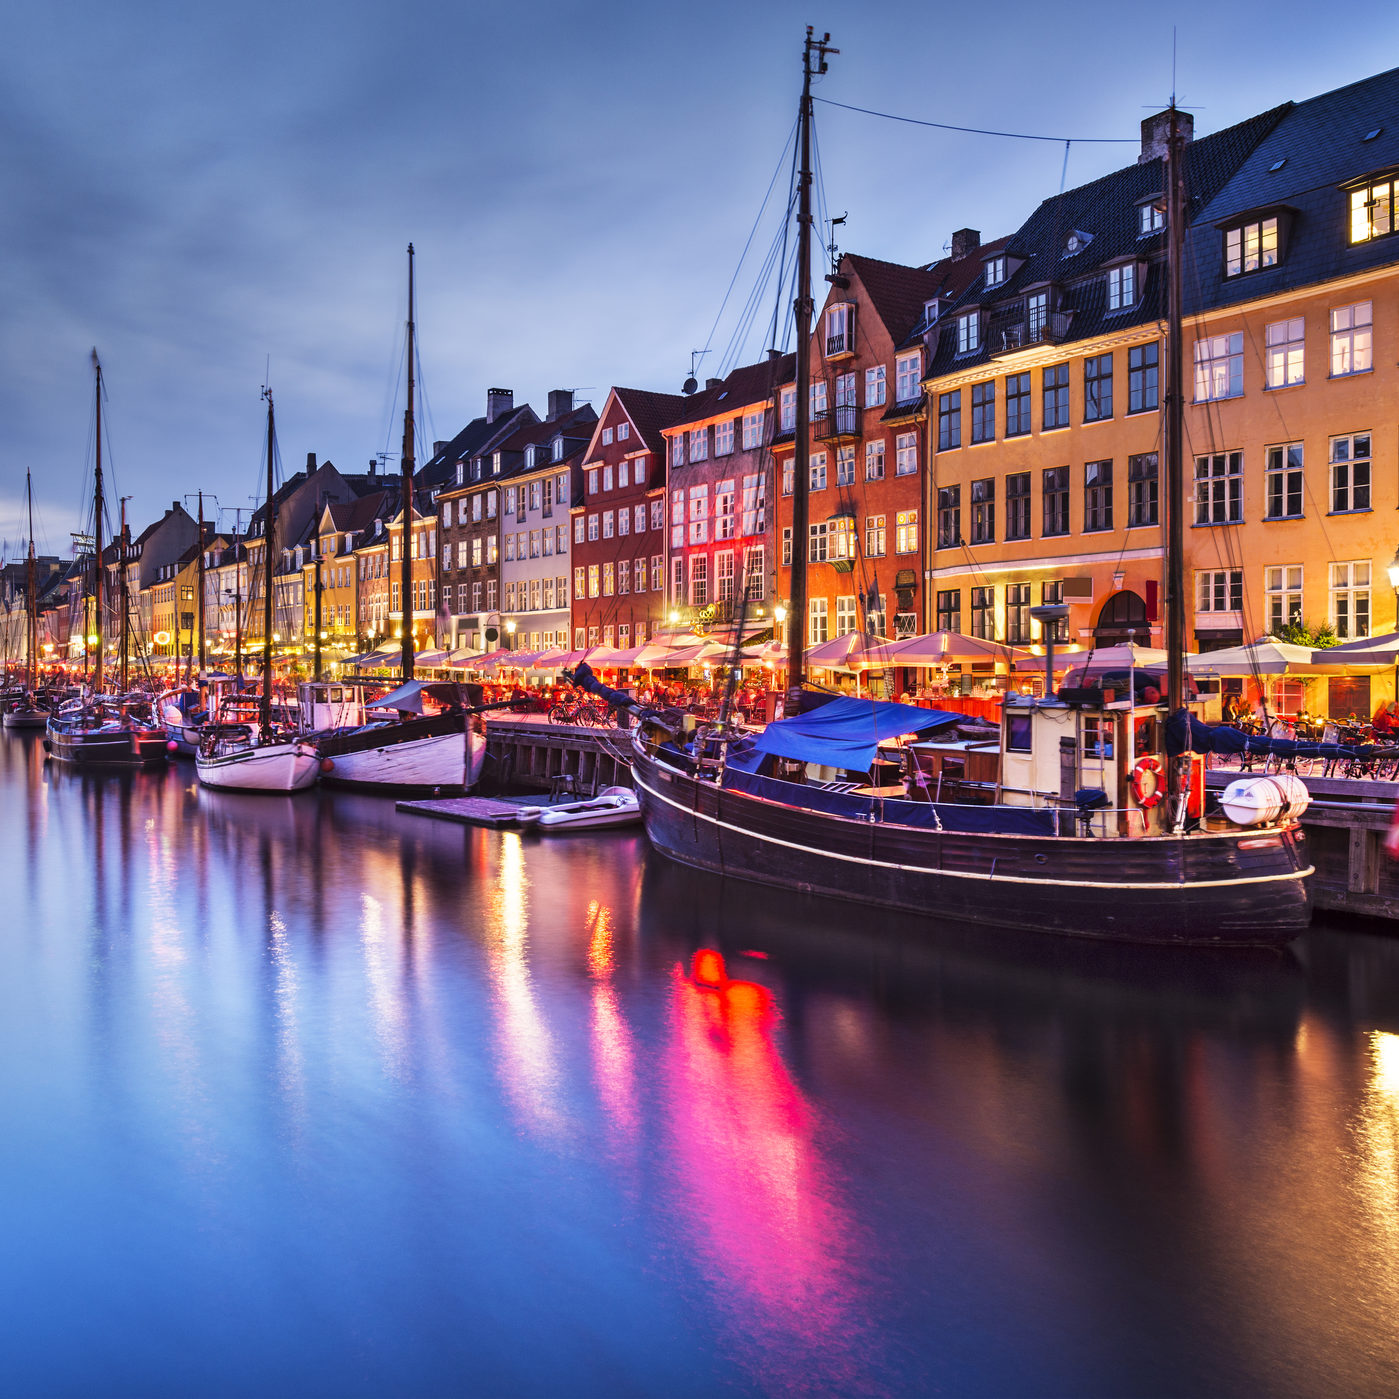 Today only: Flights to Scandinavia from $95 one-way